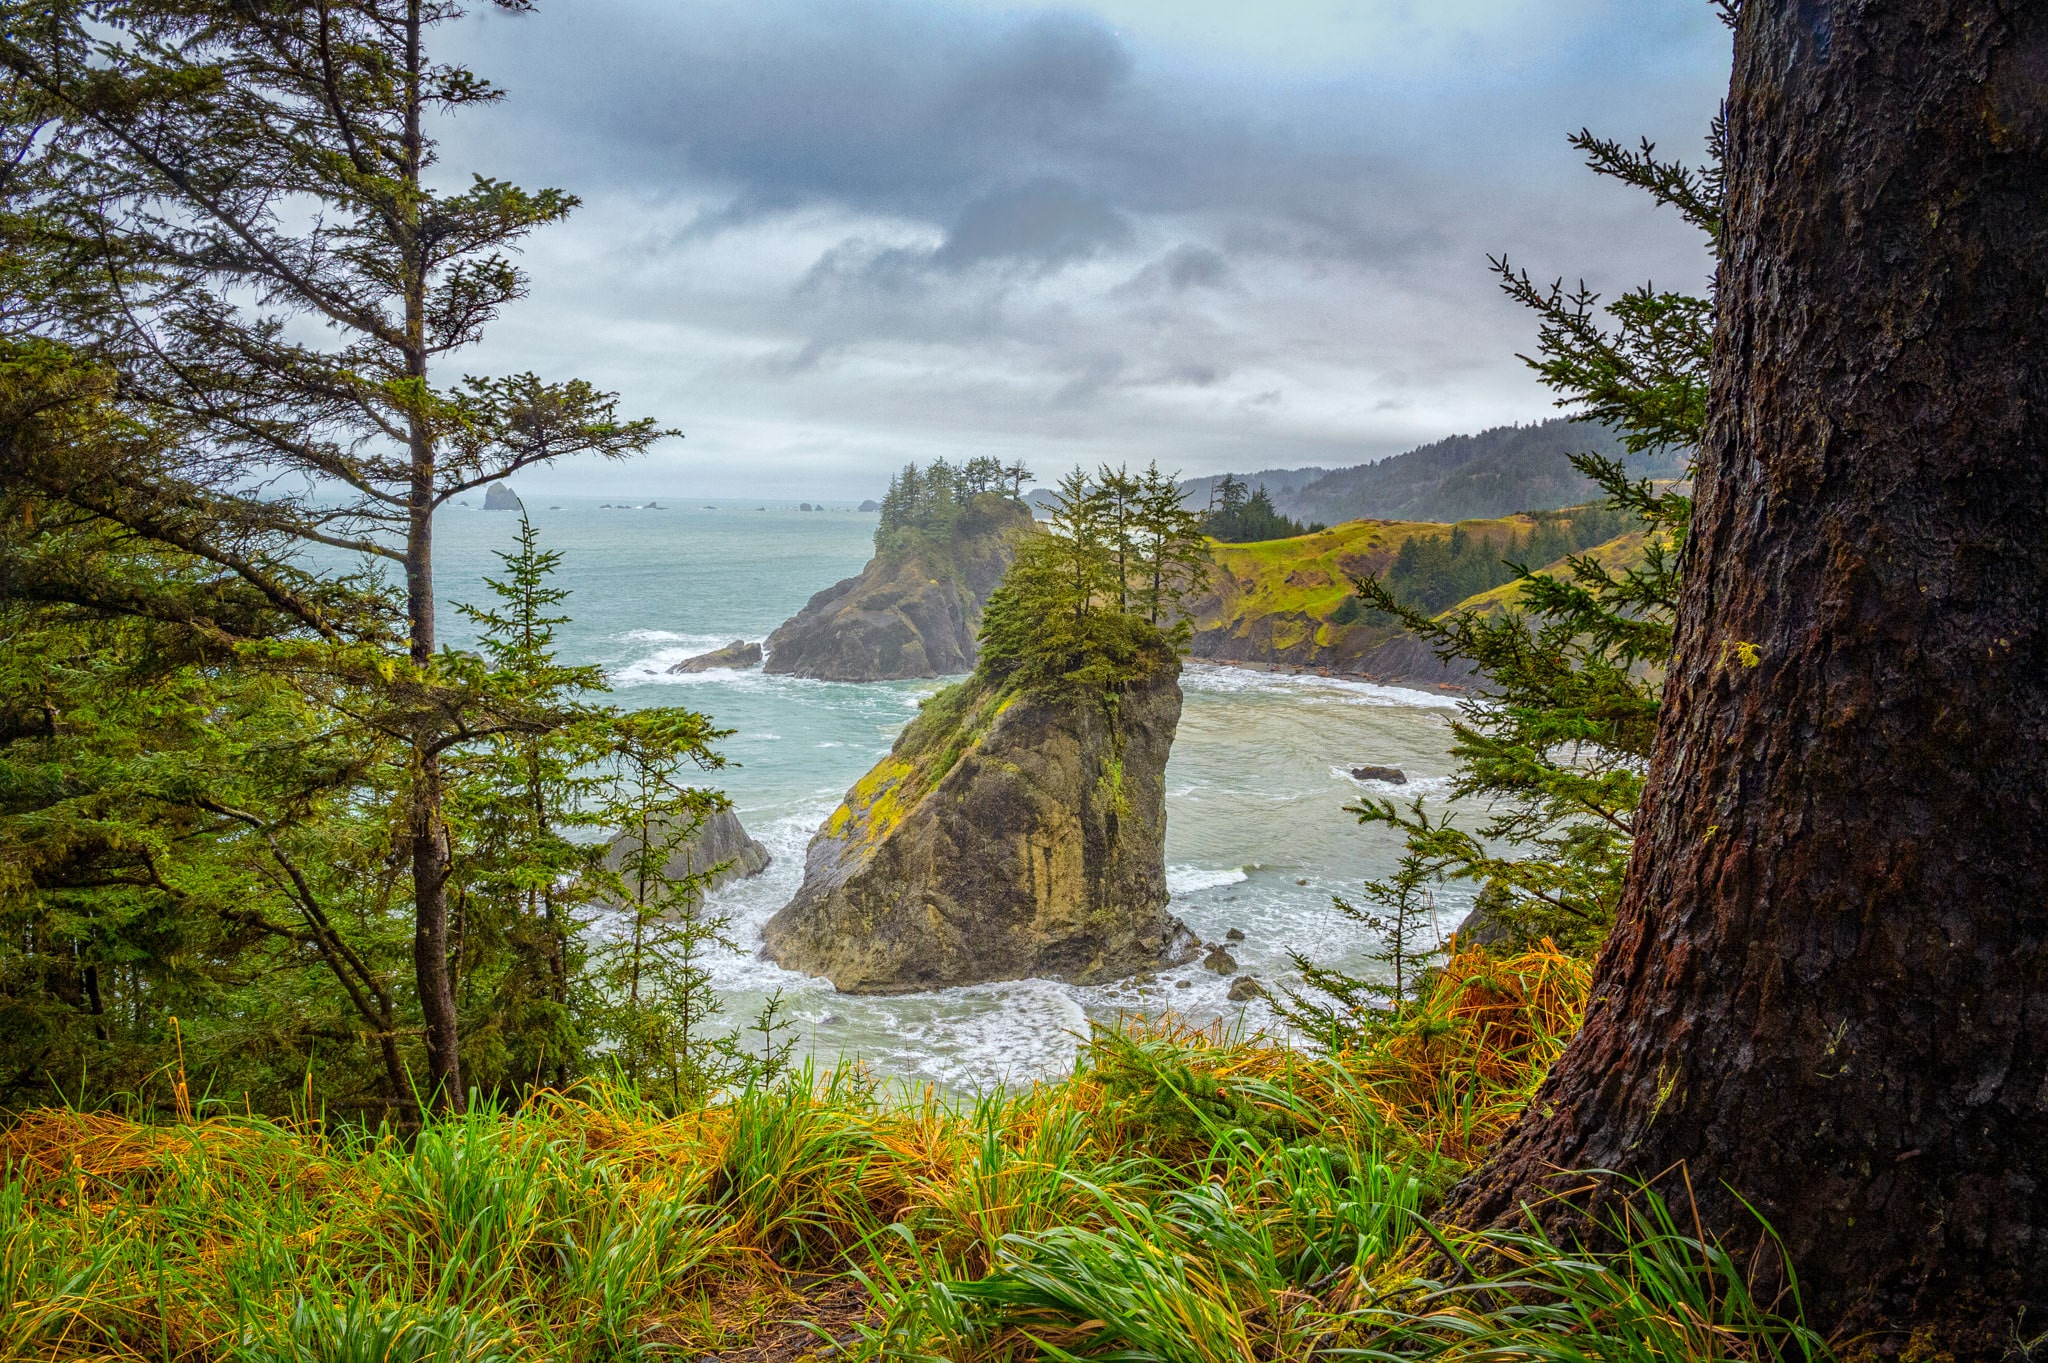 Various pine trees grow atop a large rock, which is visible along one of the trails in Cape Sebastian State Scenic Corridor in Oregon - Oregon's Pacific coast